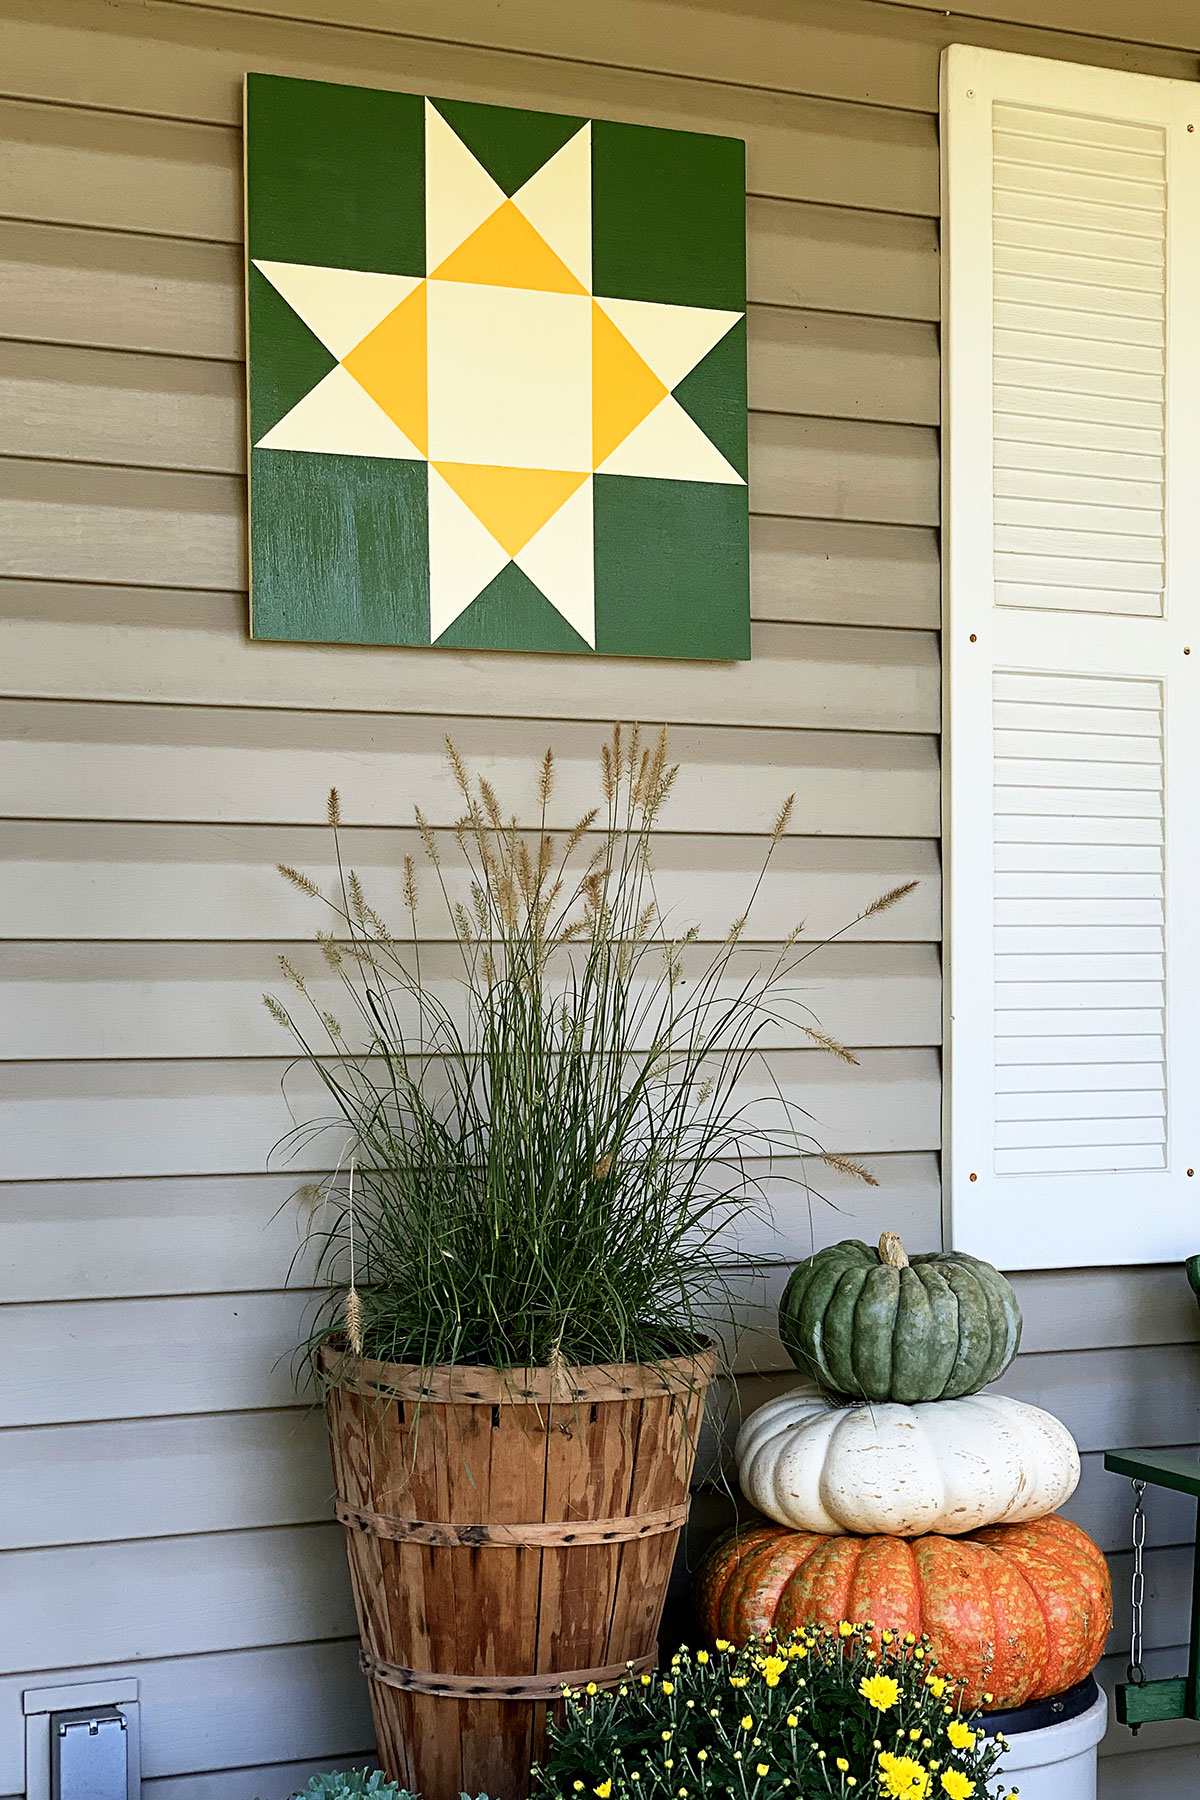 How To Make A barn Quilt